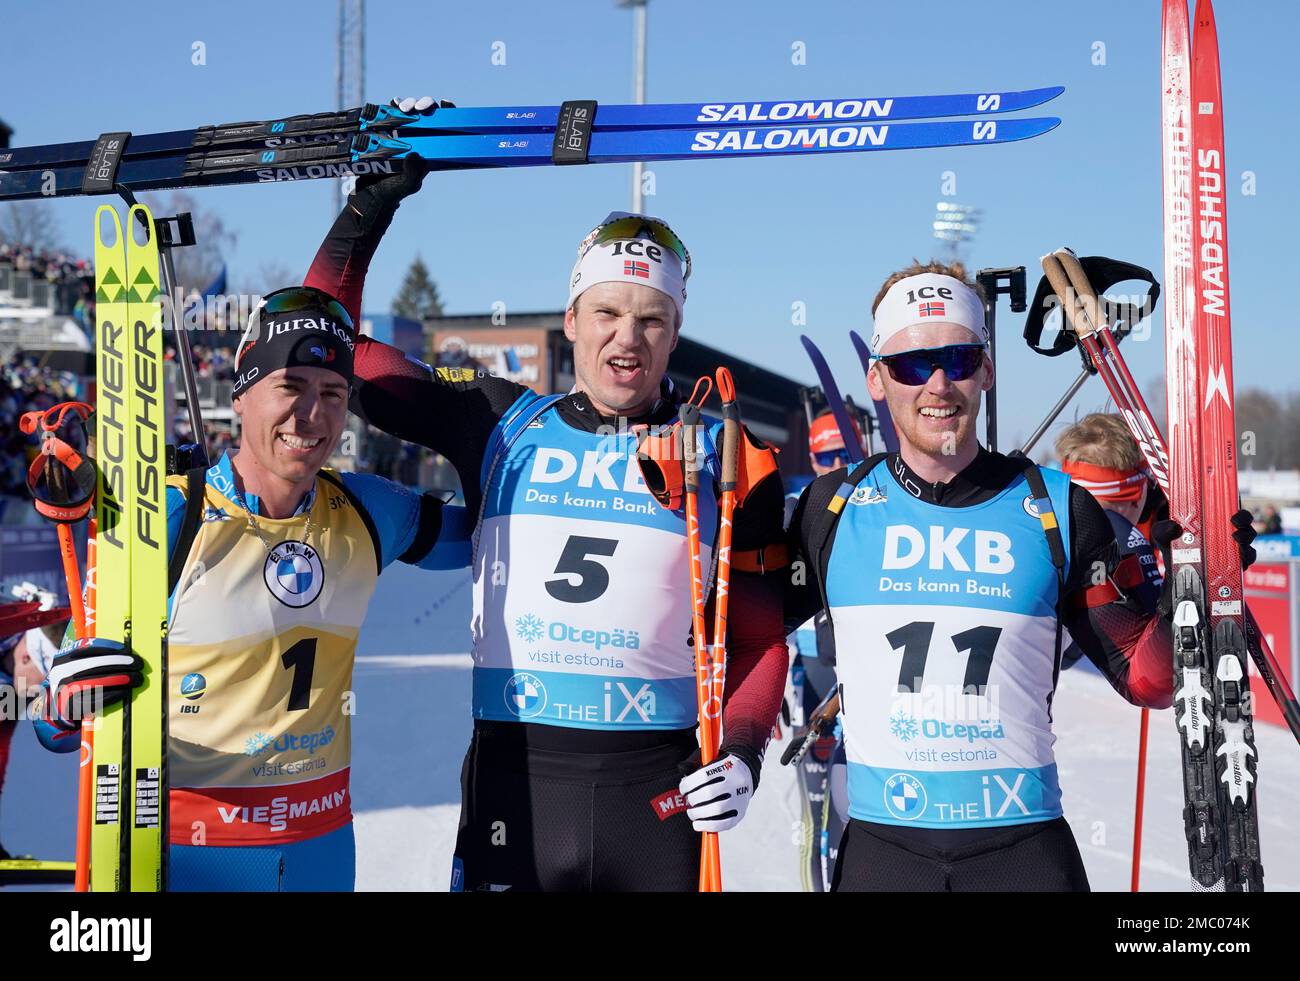 Winner Vetle Sjaastad Christiansen of Norway, center, second placed Quentin  Fillon Maillet of France, left, and third placed Sivert Guttorm Bakken of  Norway, celebrate at the finish after the men's 15km mass